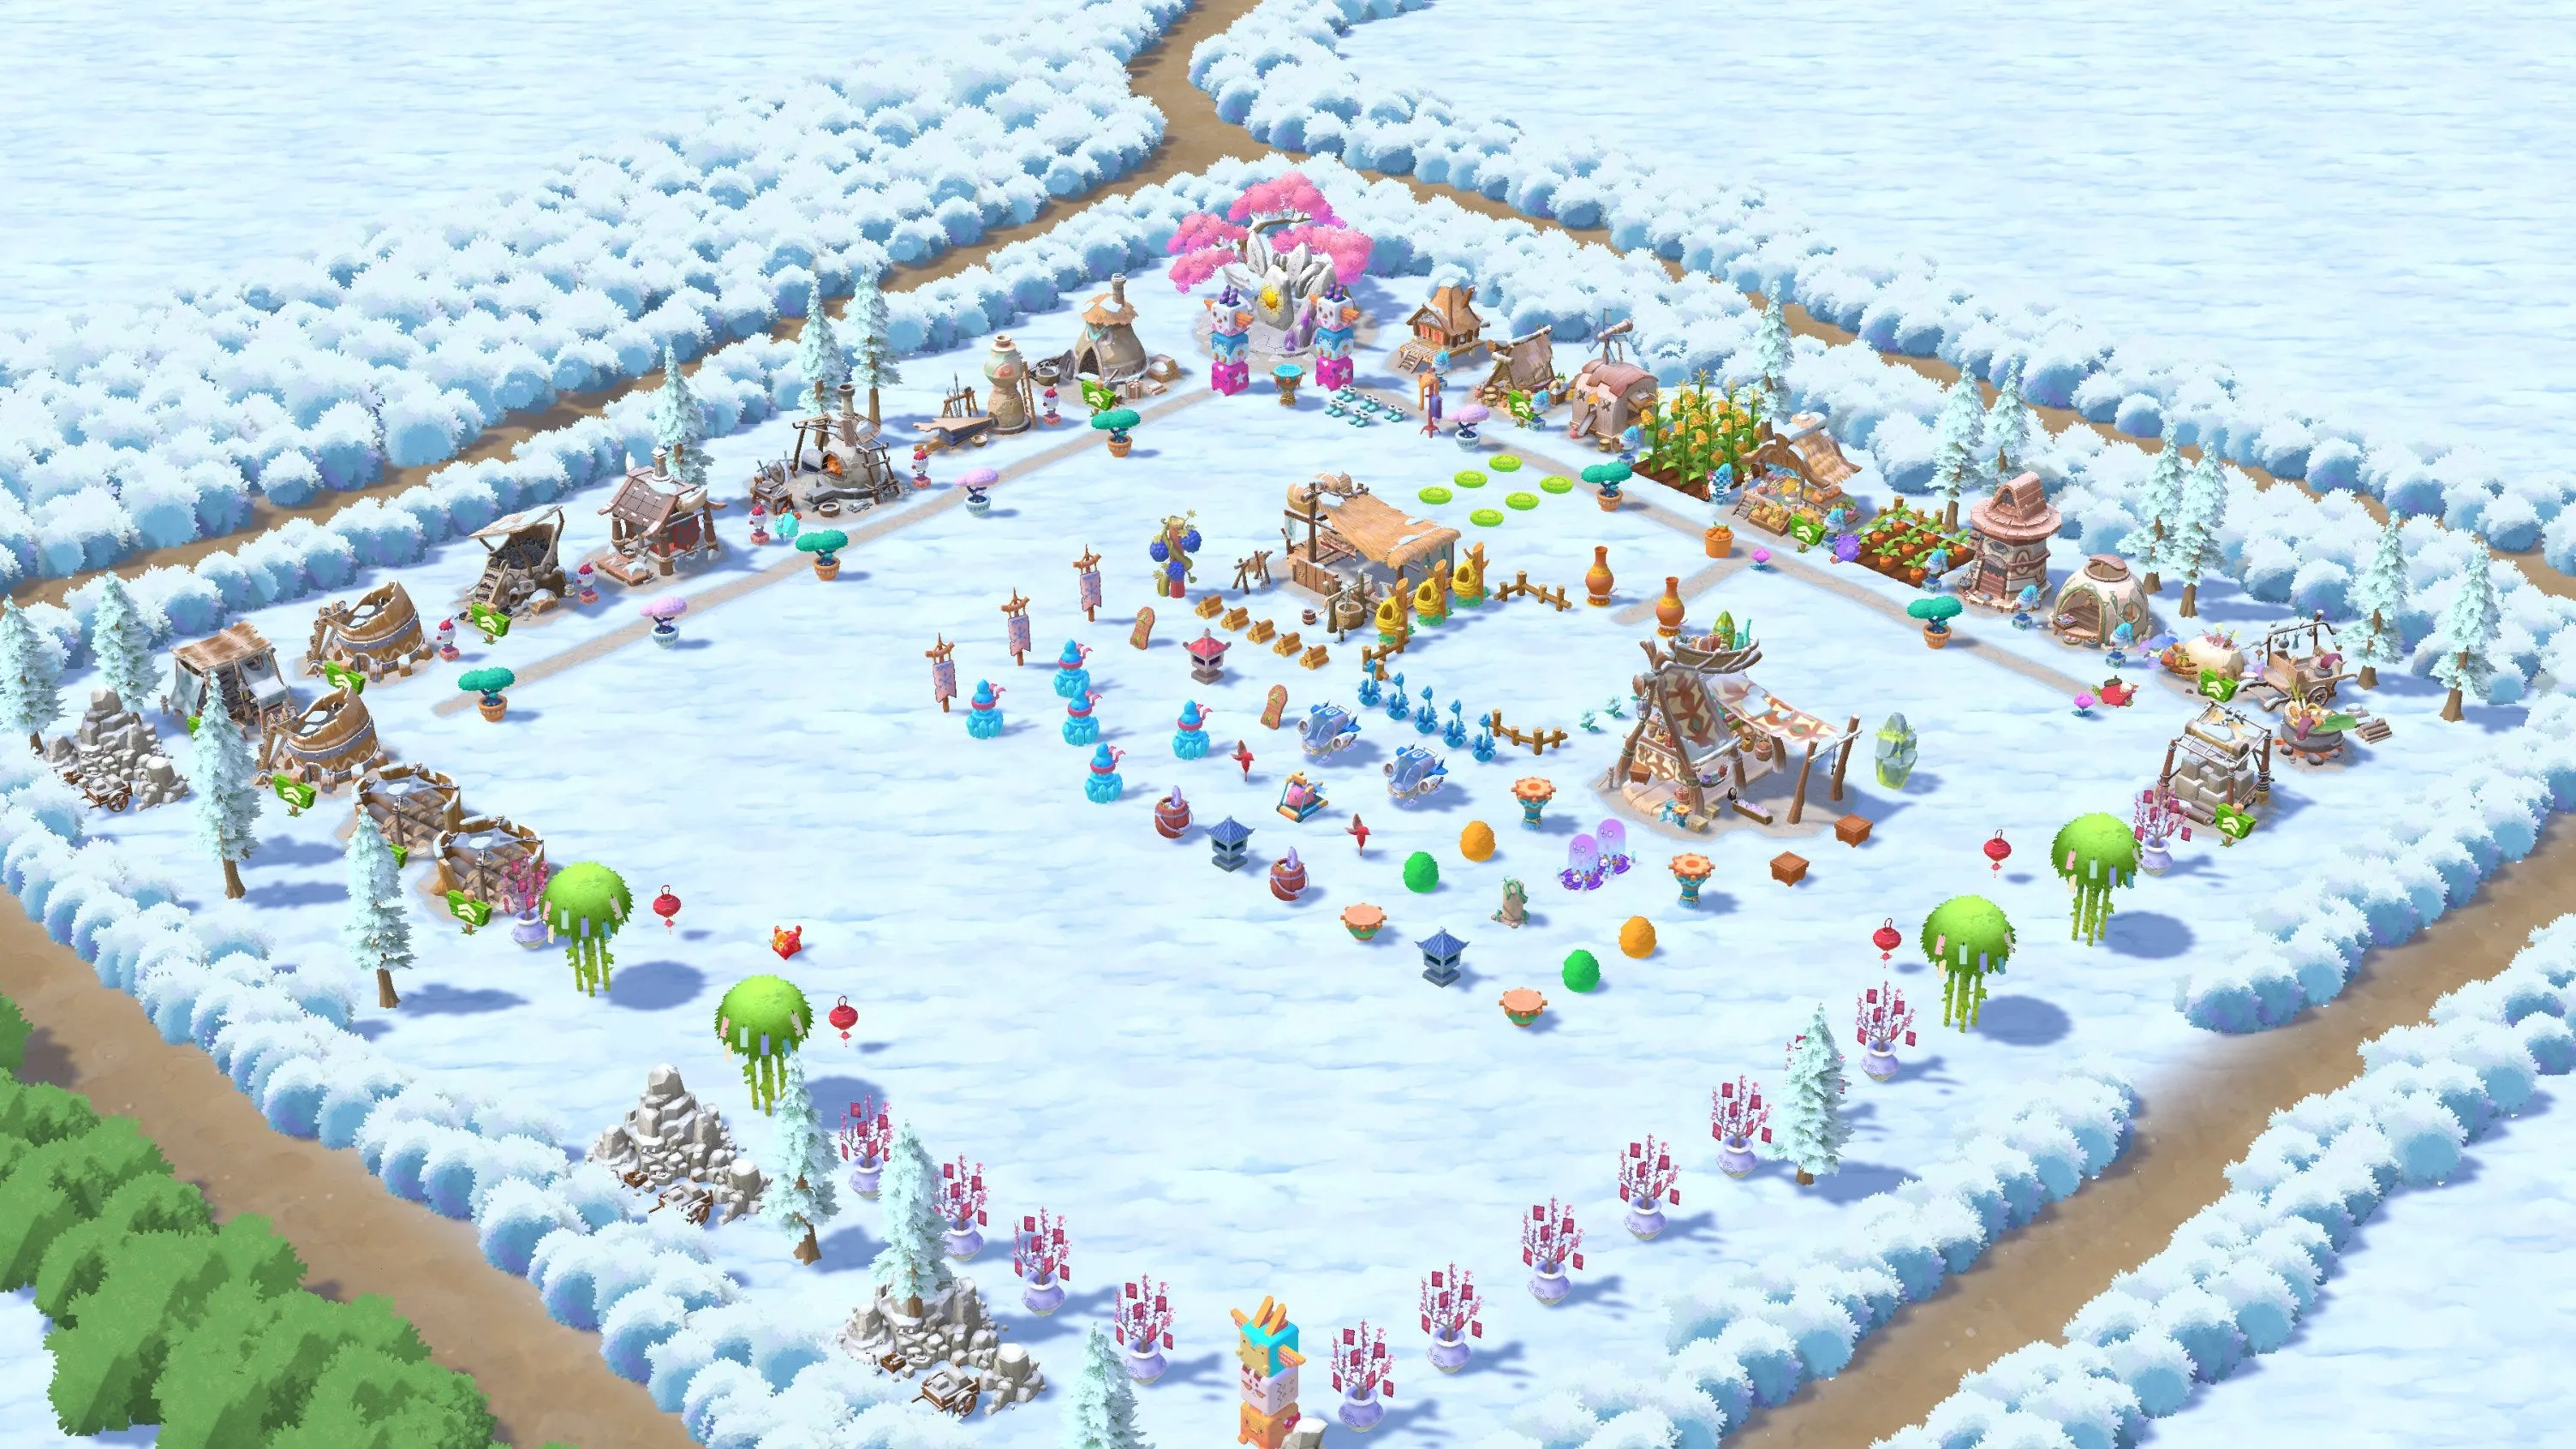 An Arctic Plot in Axie Infinity Homeland.This picture showcases the vivid visuals and unique environmental experience of Lunacia in an Arctic setting.